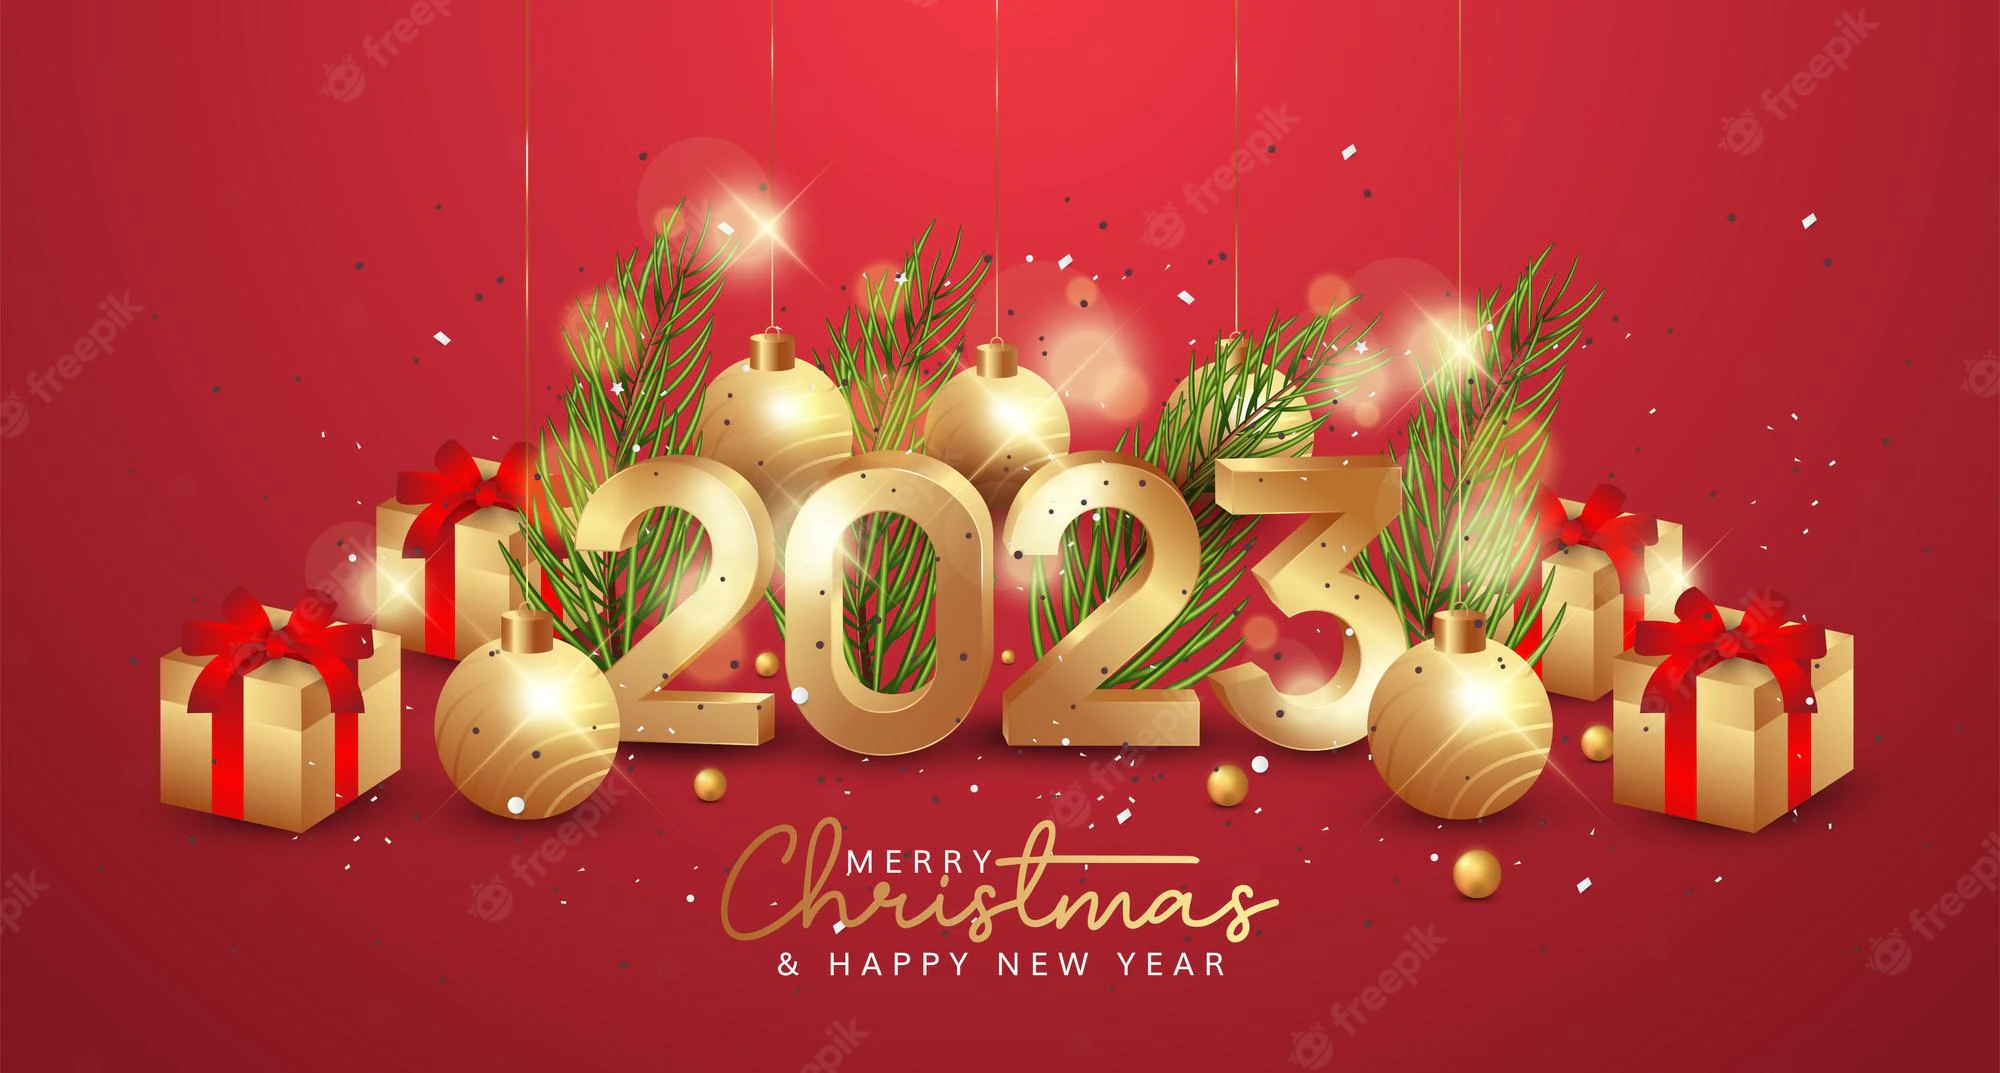 Merry Christmas Happy New Year 2023 Greeting Red Background 663386 63